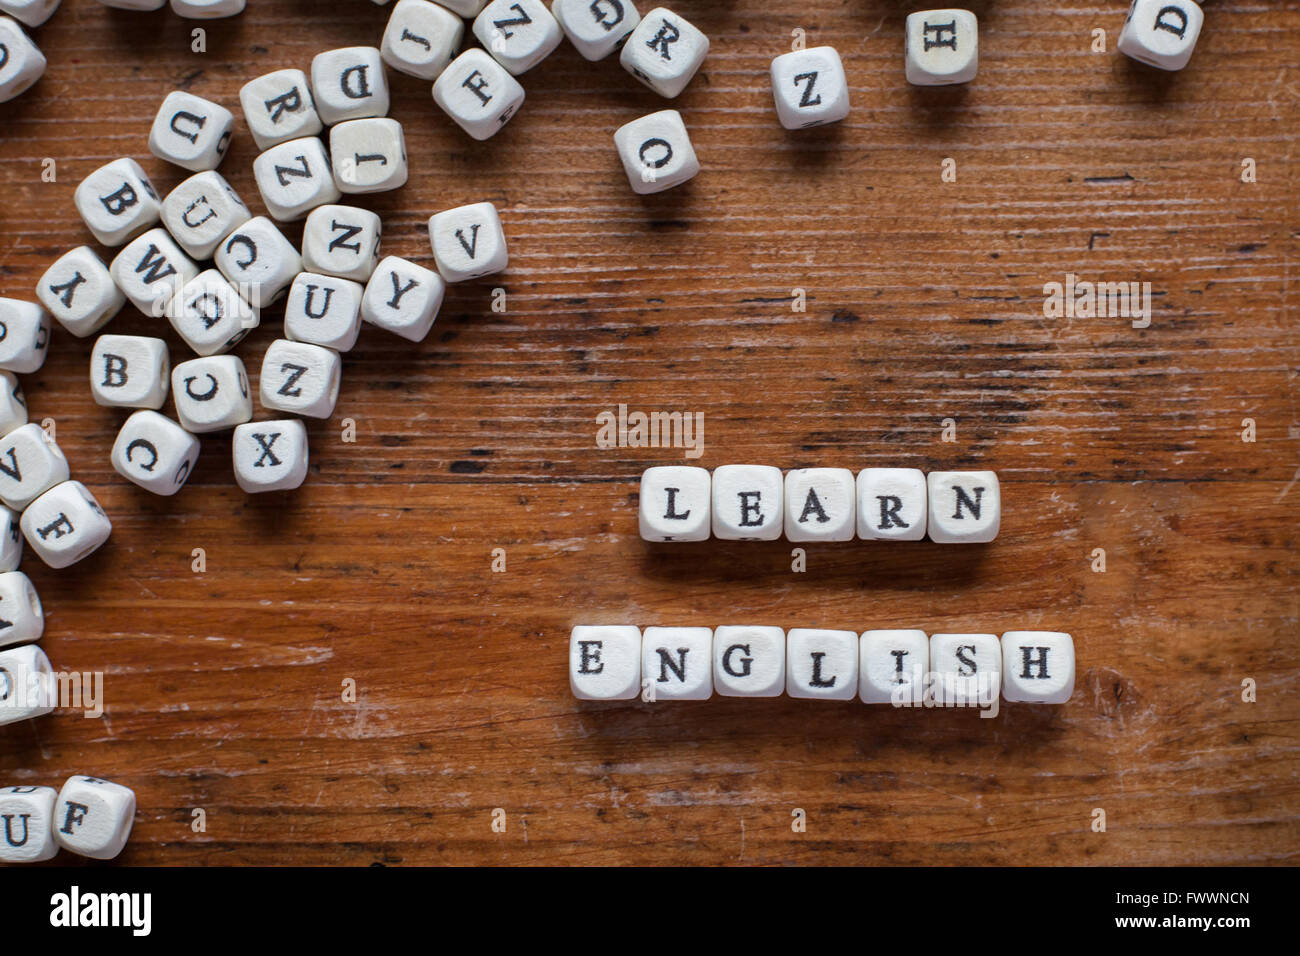 learn english concept Stock Photo